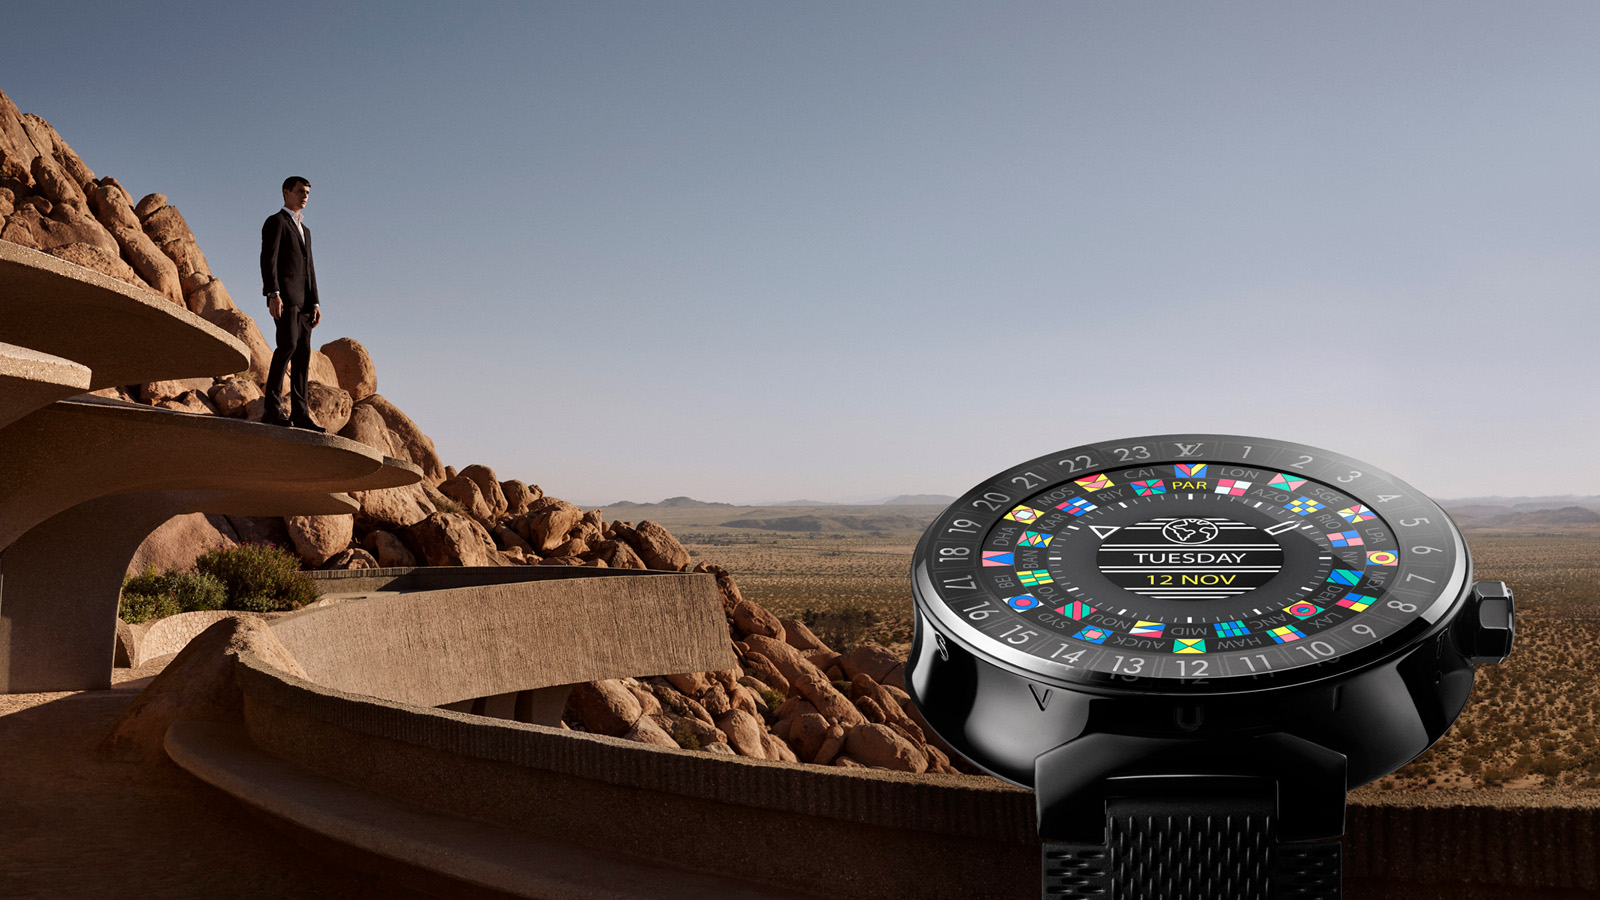 Louis Vuitton Launches Its First Luxury Smartwatch: Tambour Horizon